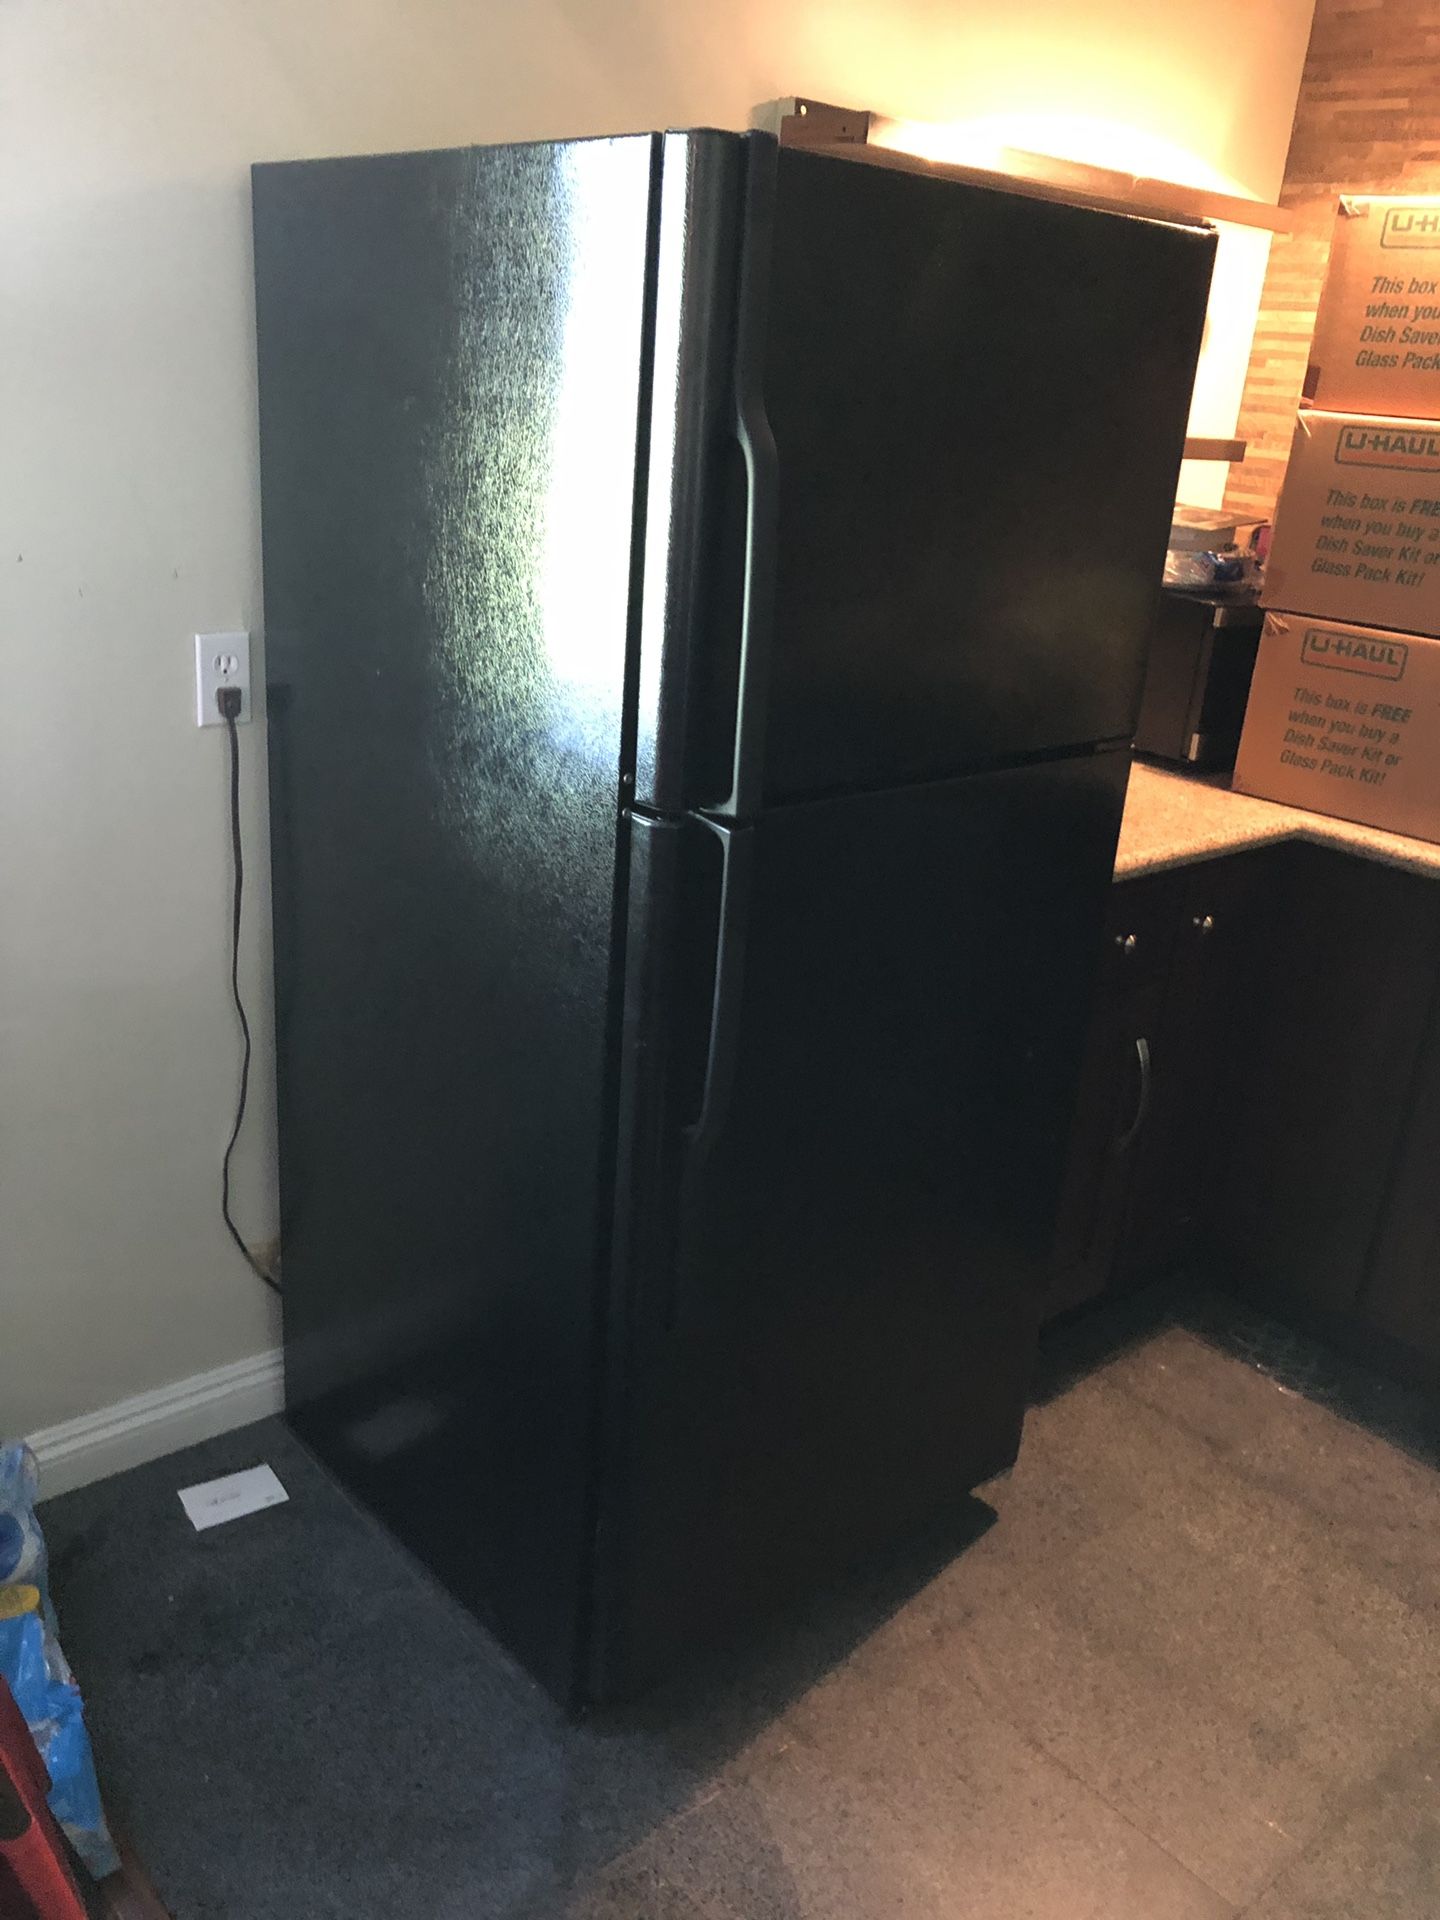 GE BLACK REFRIGERATOR WITH ICE MAKER. Moving - MUST BE ABLE TO PICK UP!